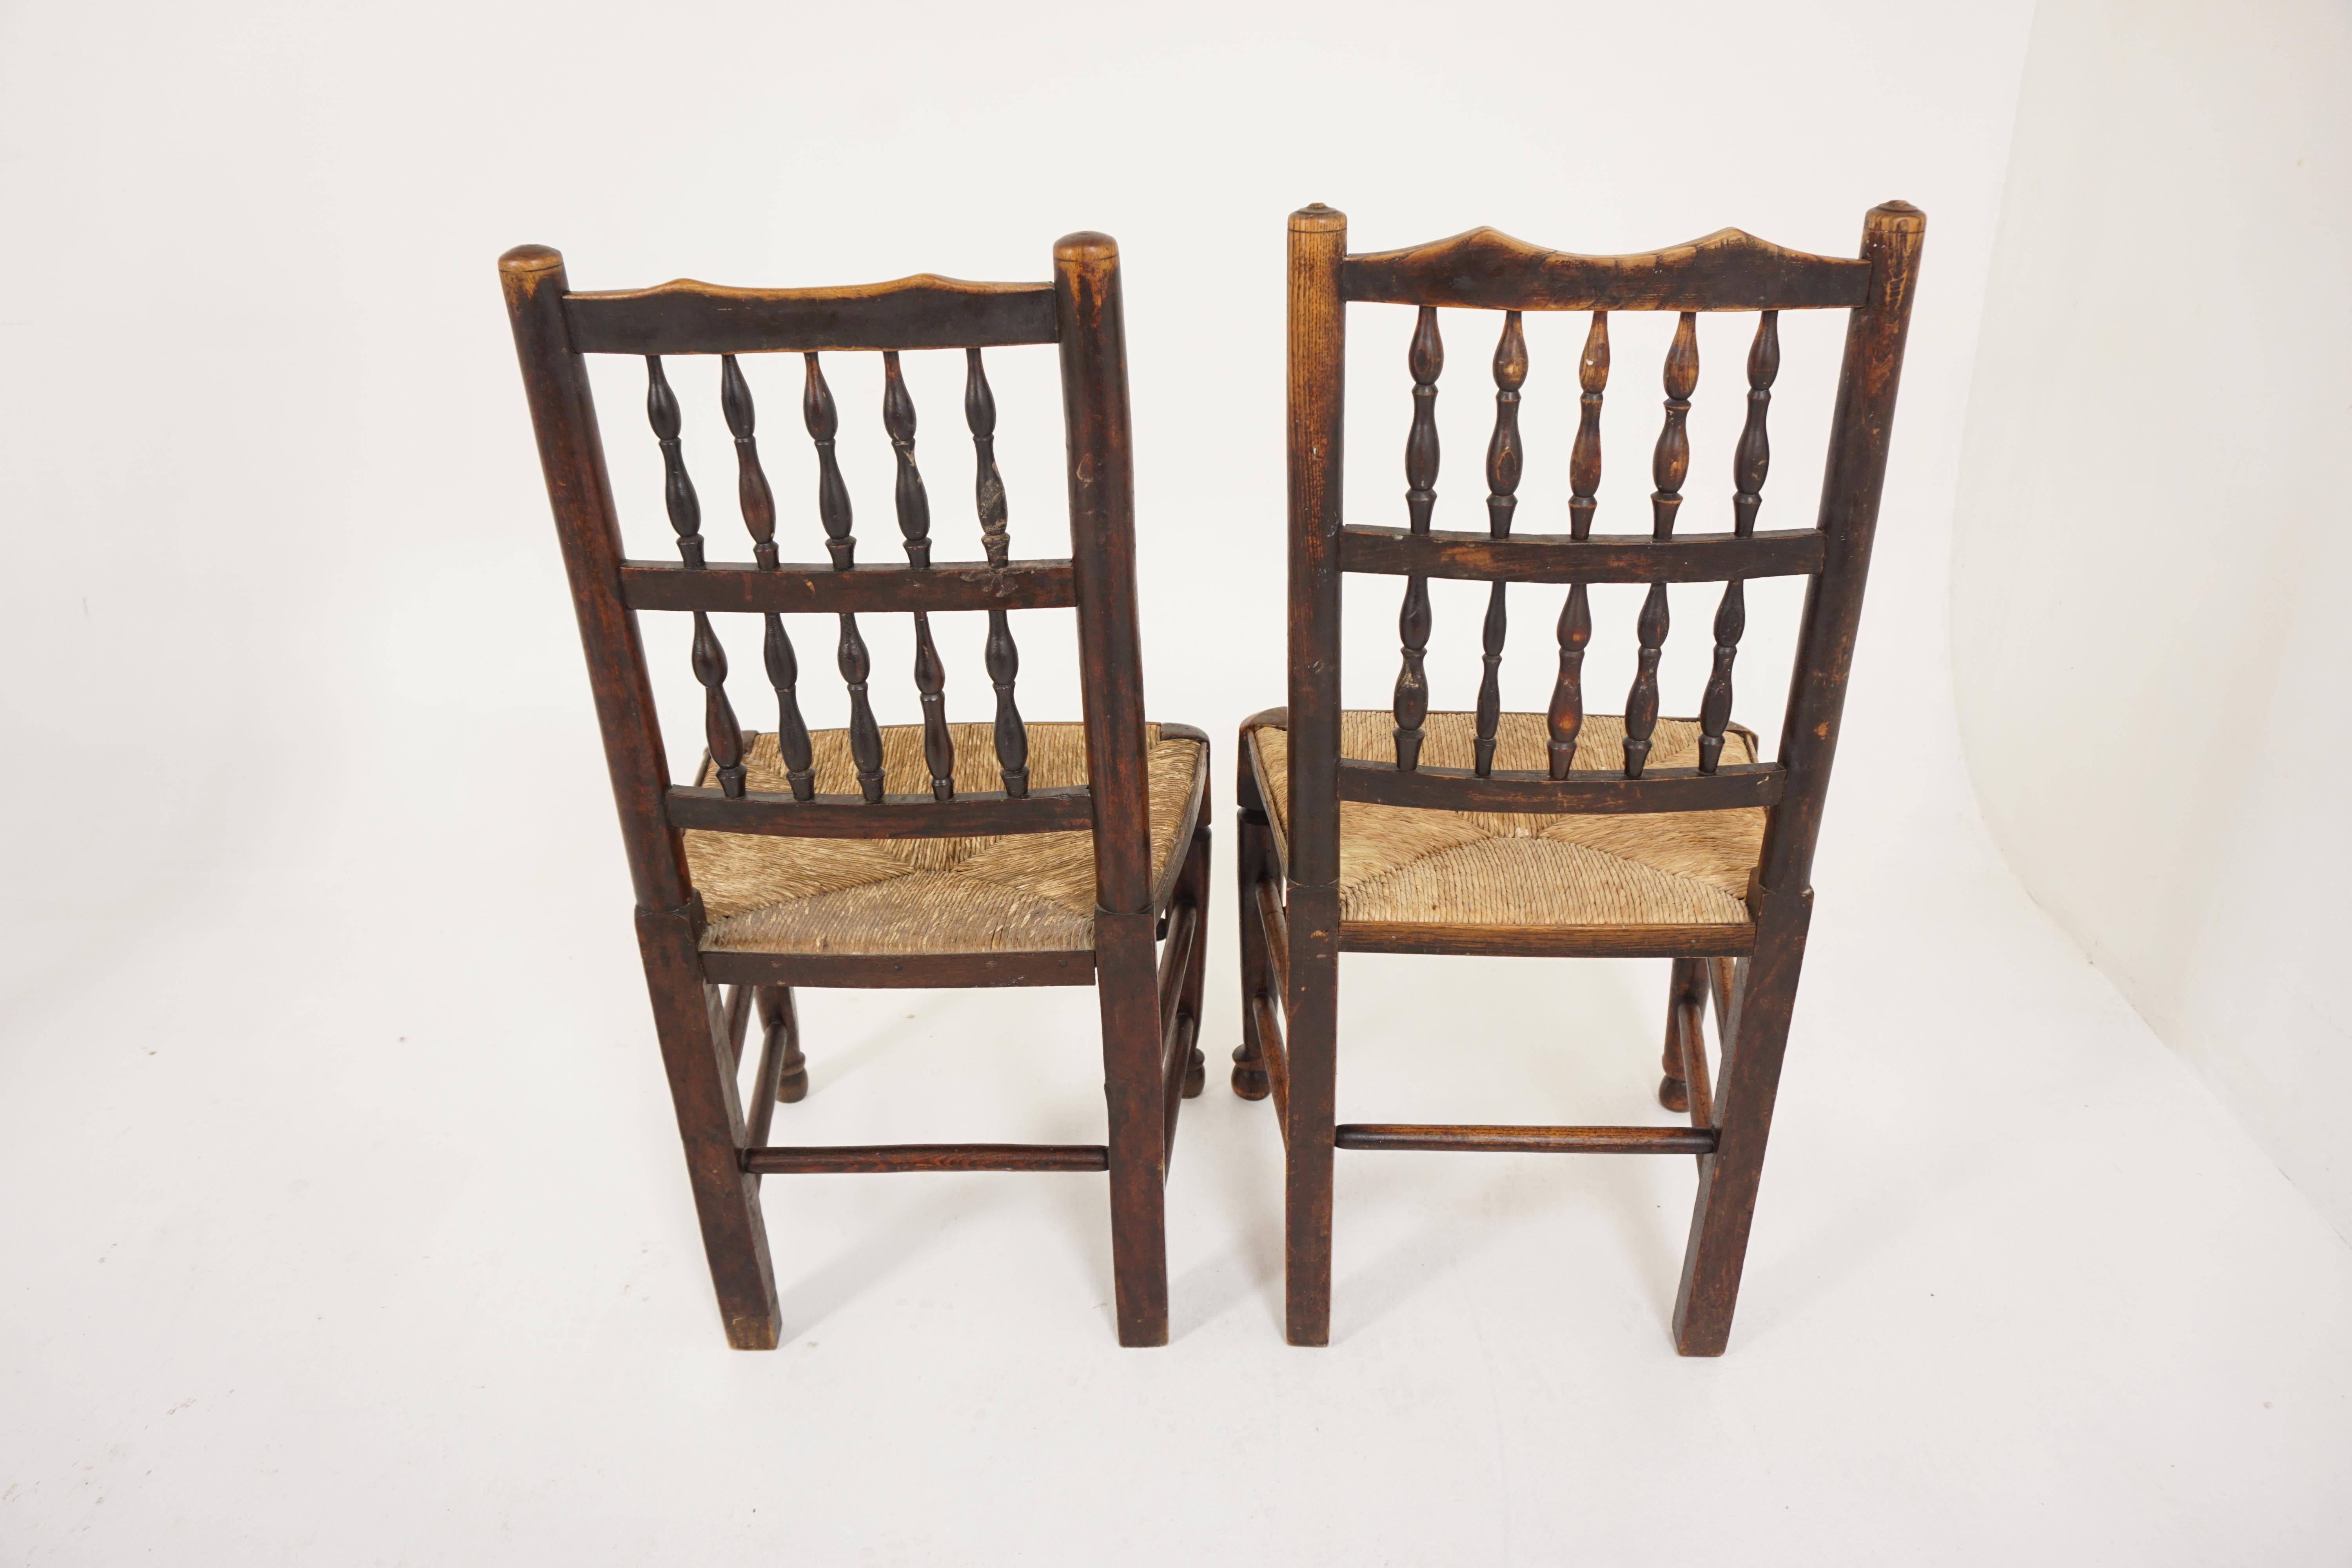 Elm 6 Antique Victorian Rush Seated Country Chairs, Lancashire England, 1890, H572